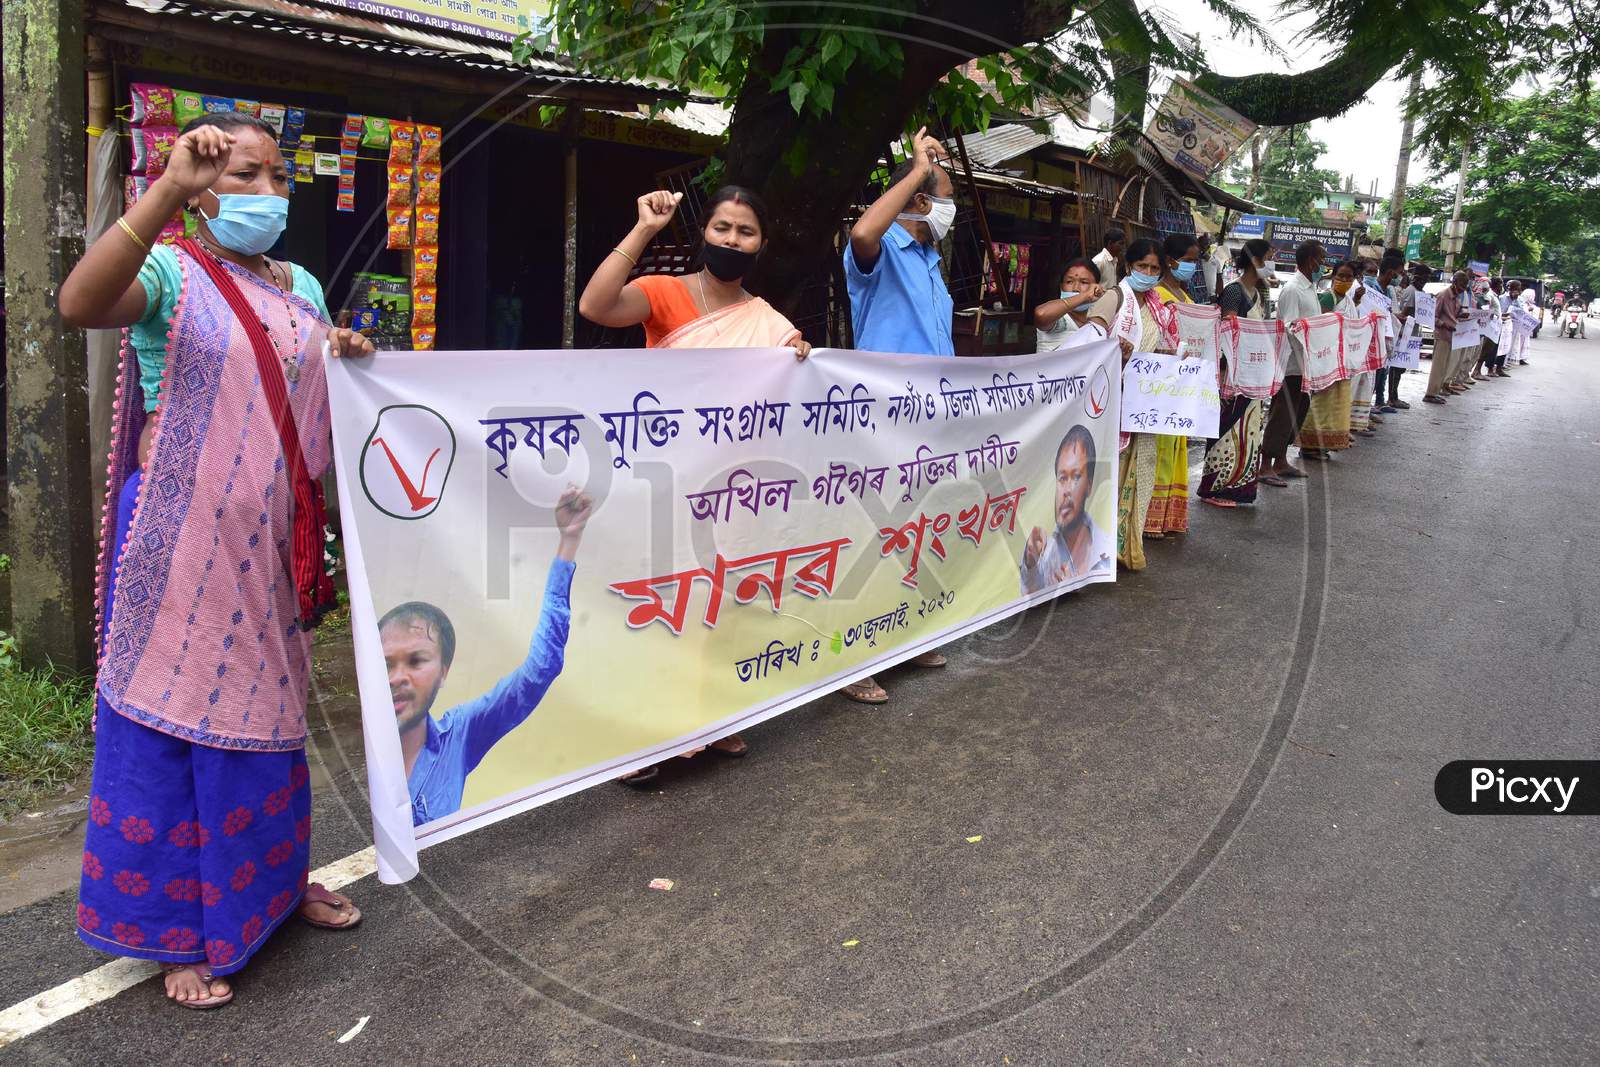 Krishak Mukti Sangram Samiti (Kmss) Activists Form A Human Chain During A Protest Against CAA 2019 And Demanding Release Of Their Leader Akhil Gogoi At Babejia In Nagaon District Of Assam On July 30,2020.